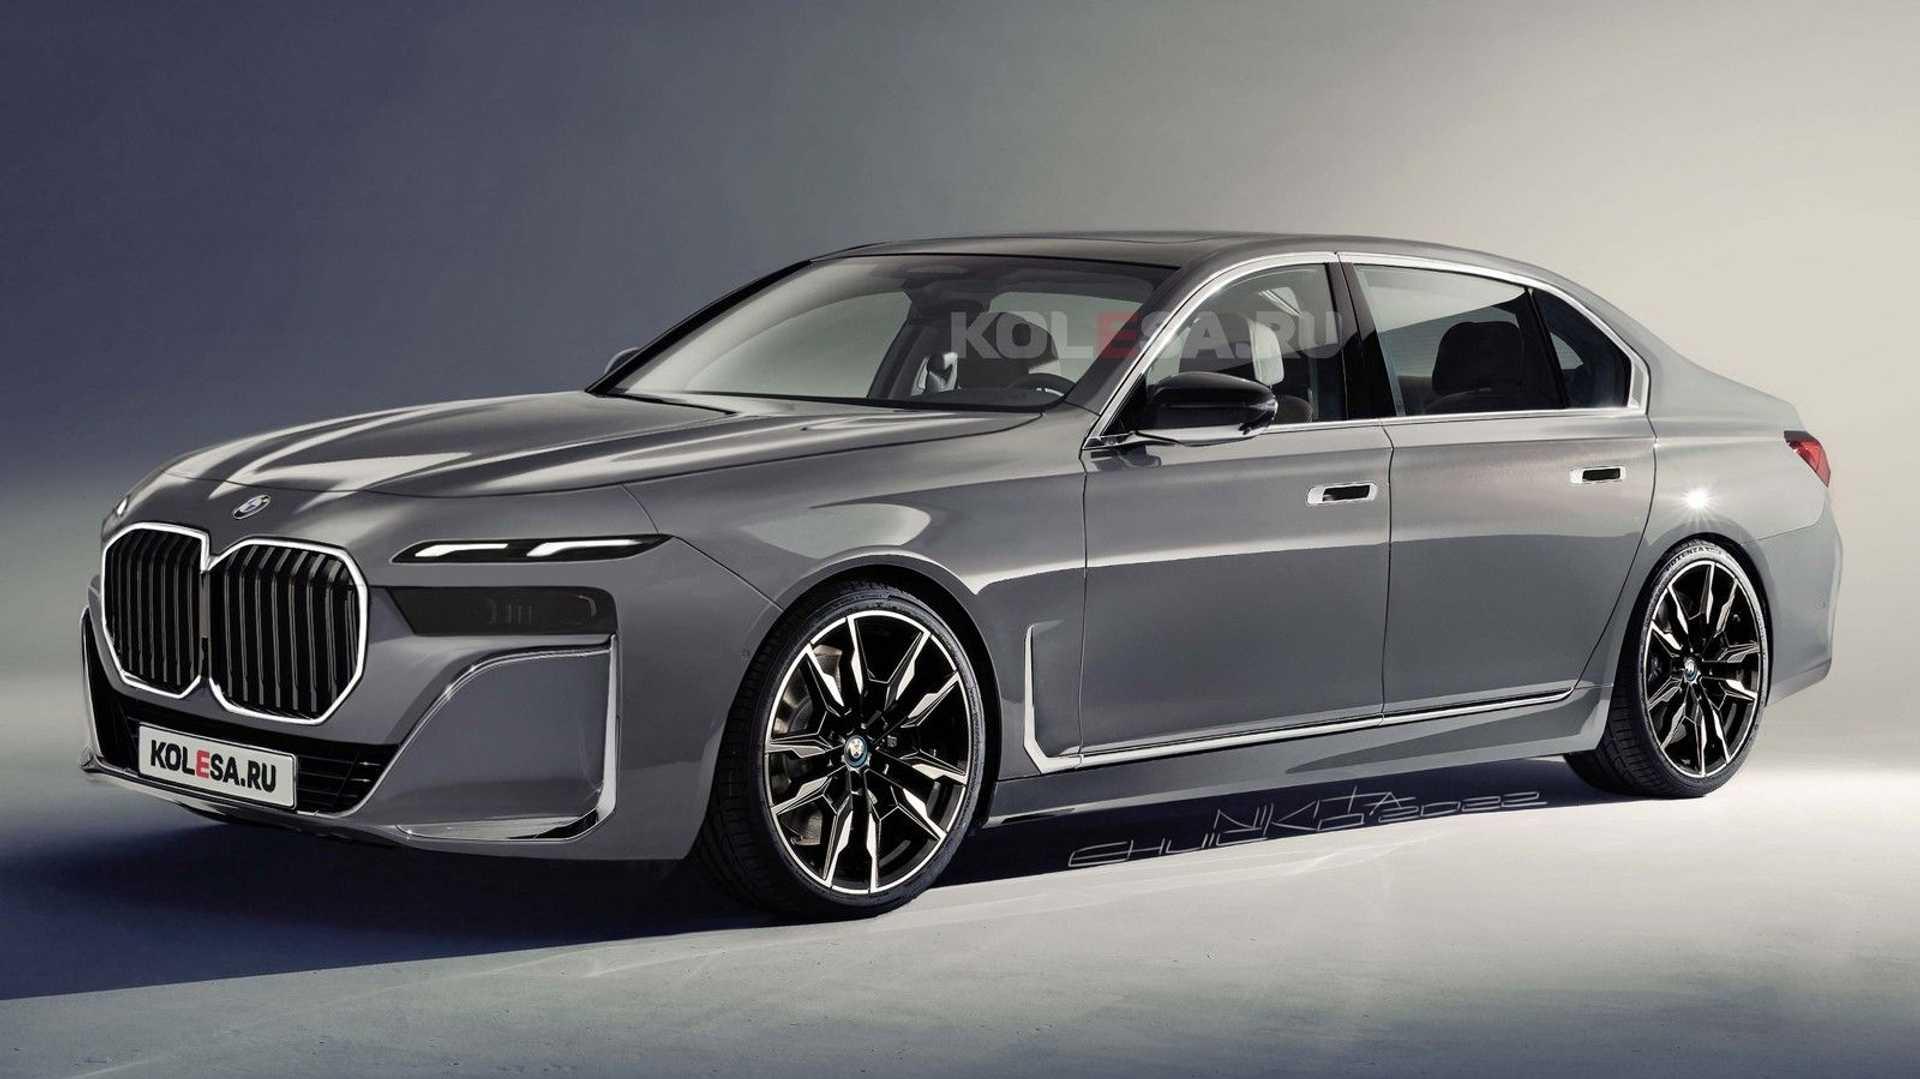 Next Gen BMW 7 Series Rendered Based On Teaser Images And Spy Photos